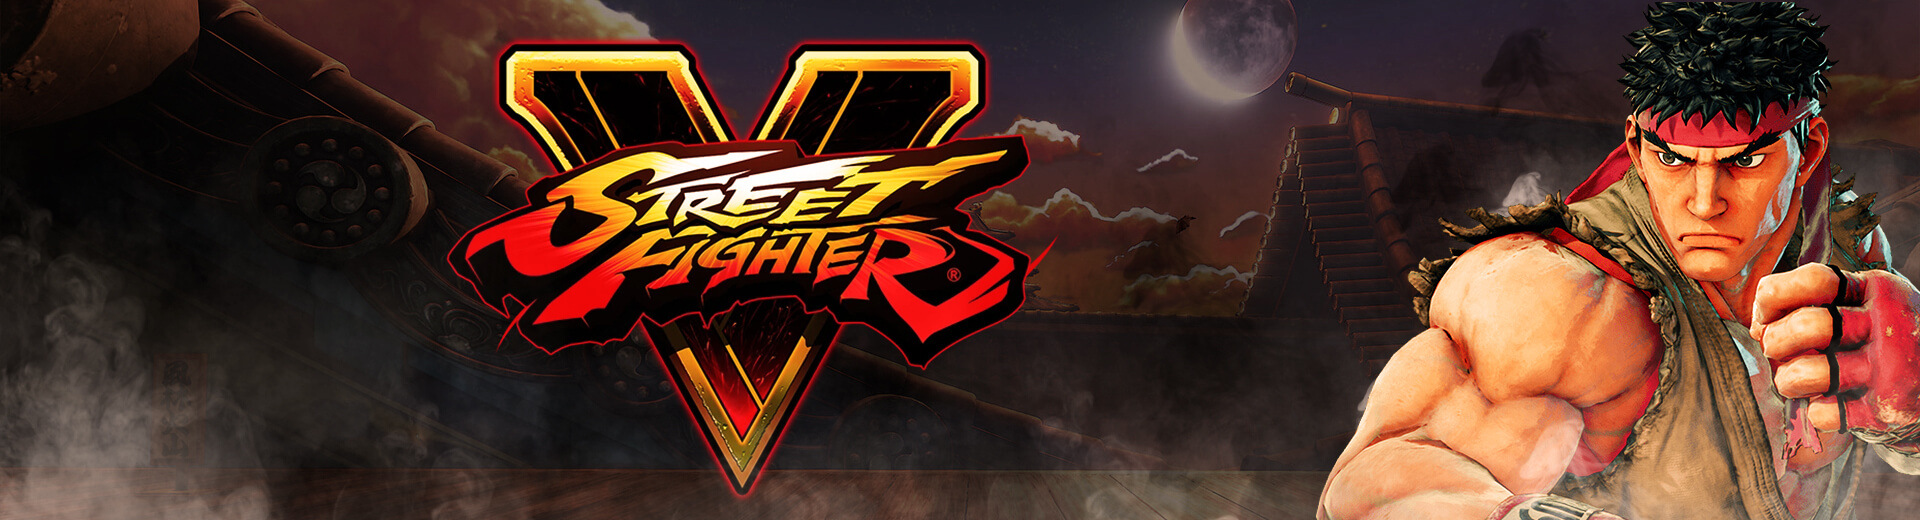 Augustreet Fighter V Colombia